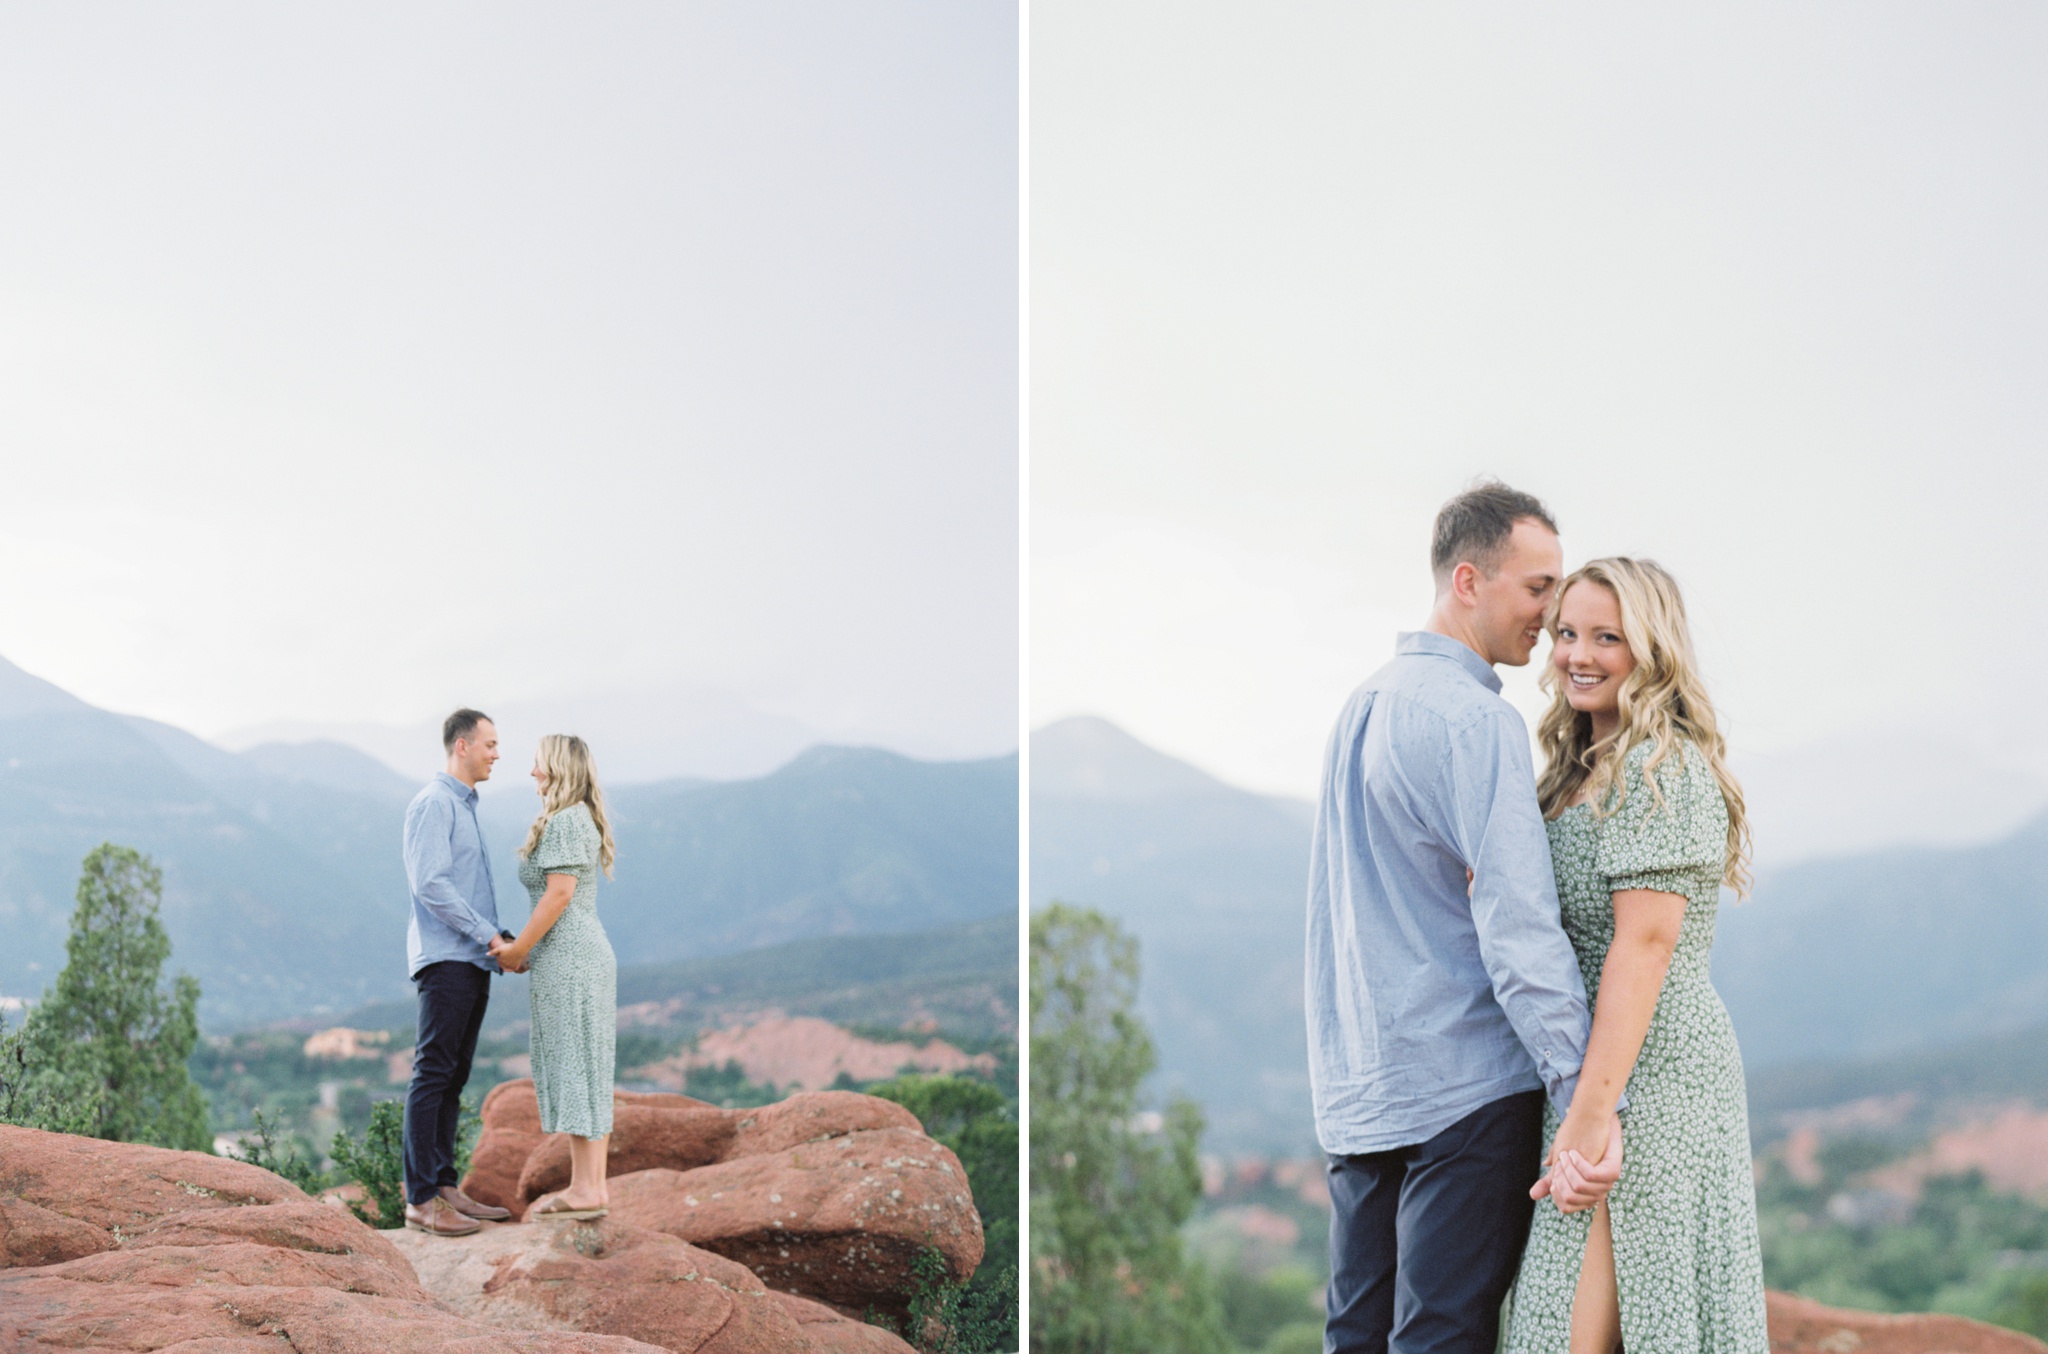 garden of the gods engagement session colorado springs photographer cat murphy photography